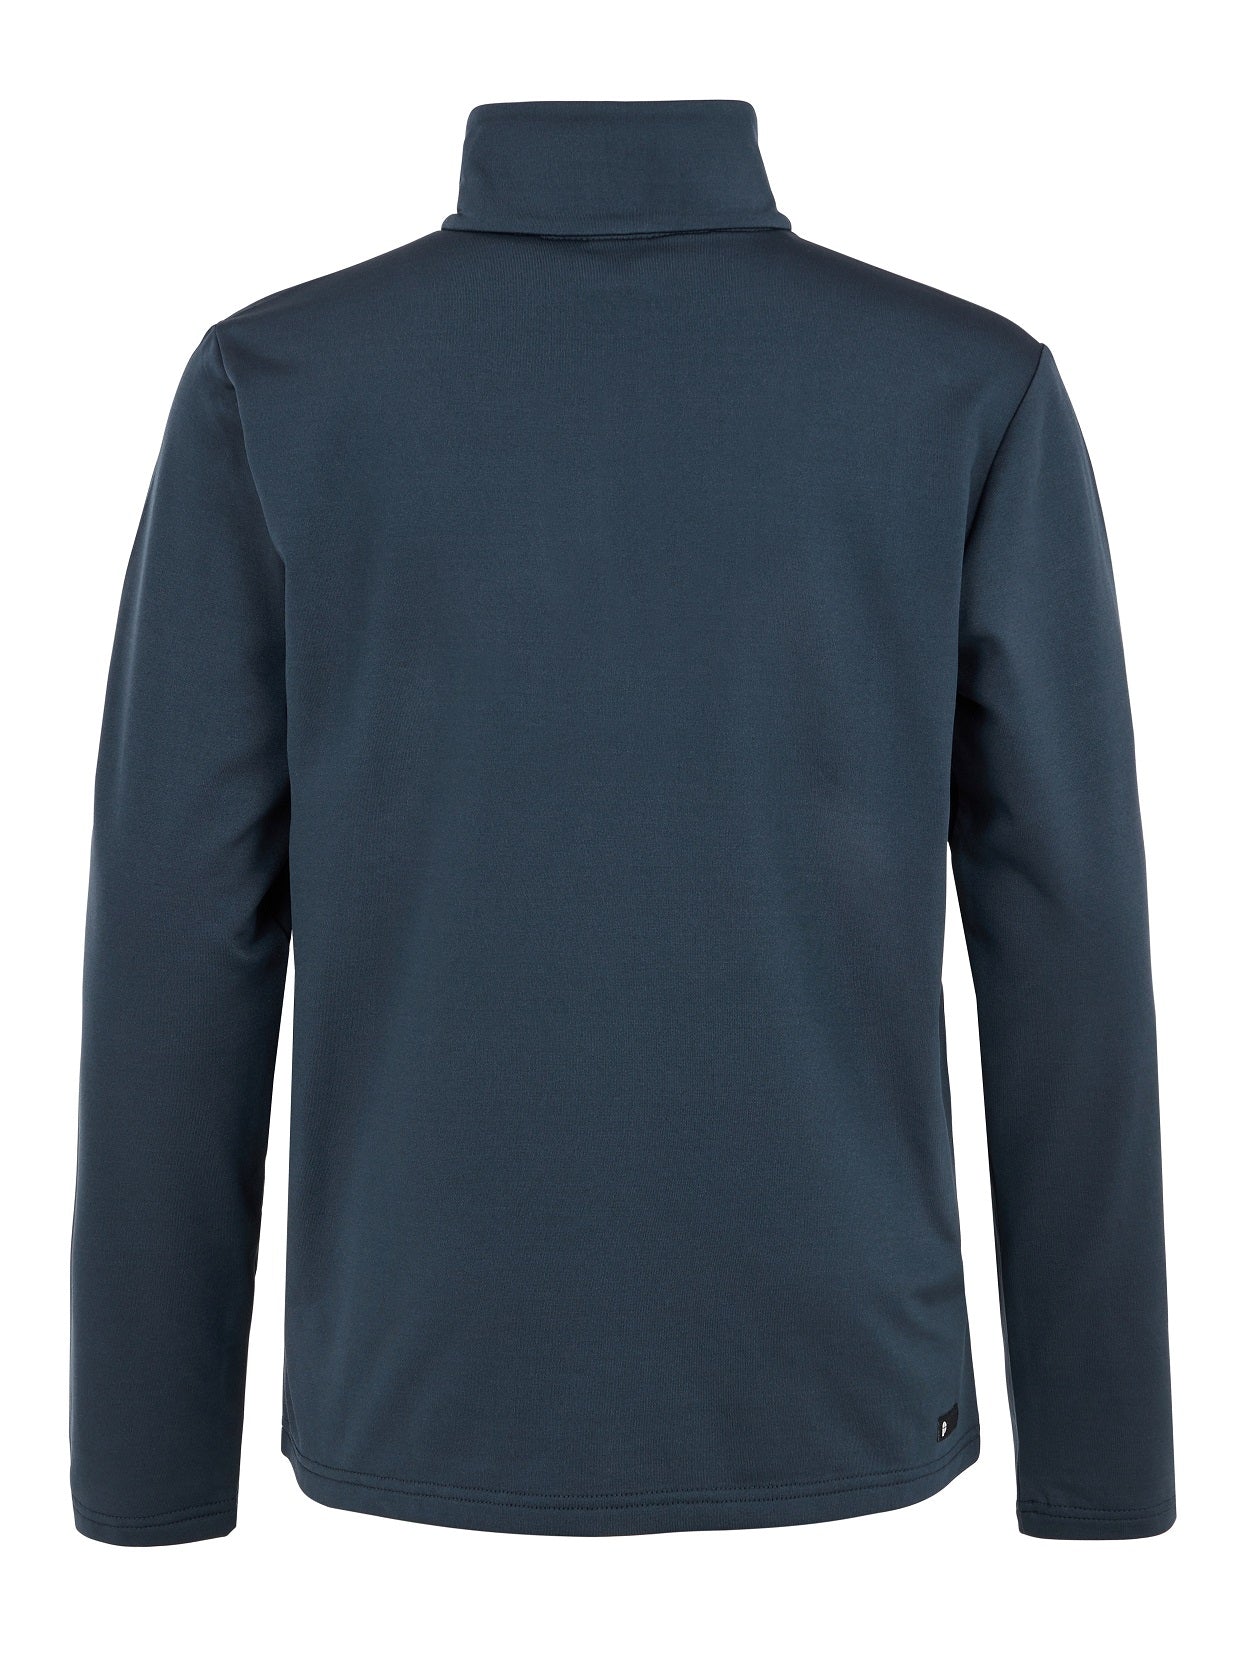 Protest Willowy Jr 1/4 Zip Skivvy Blue Nights